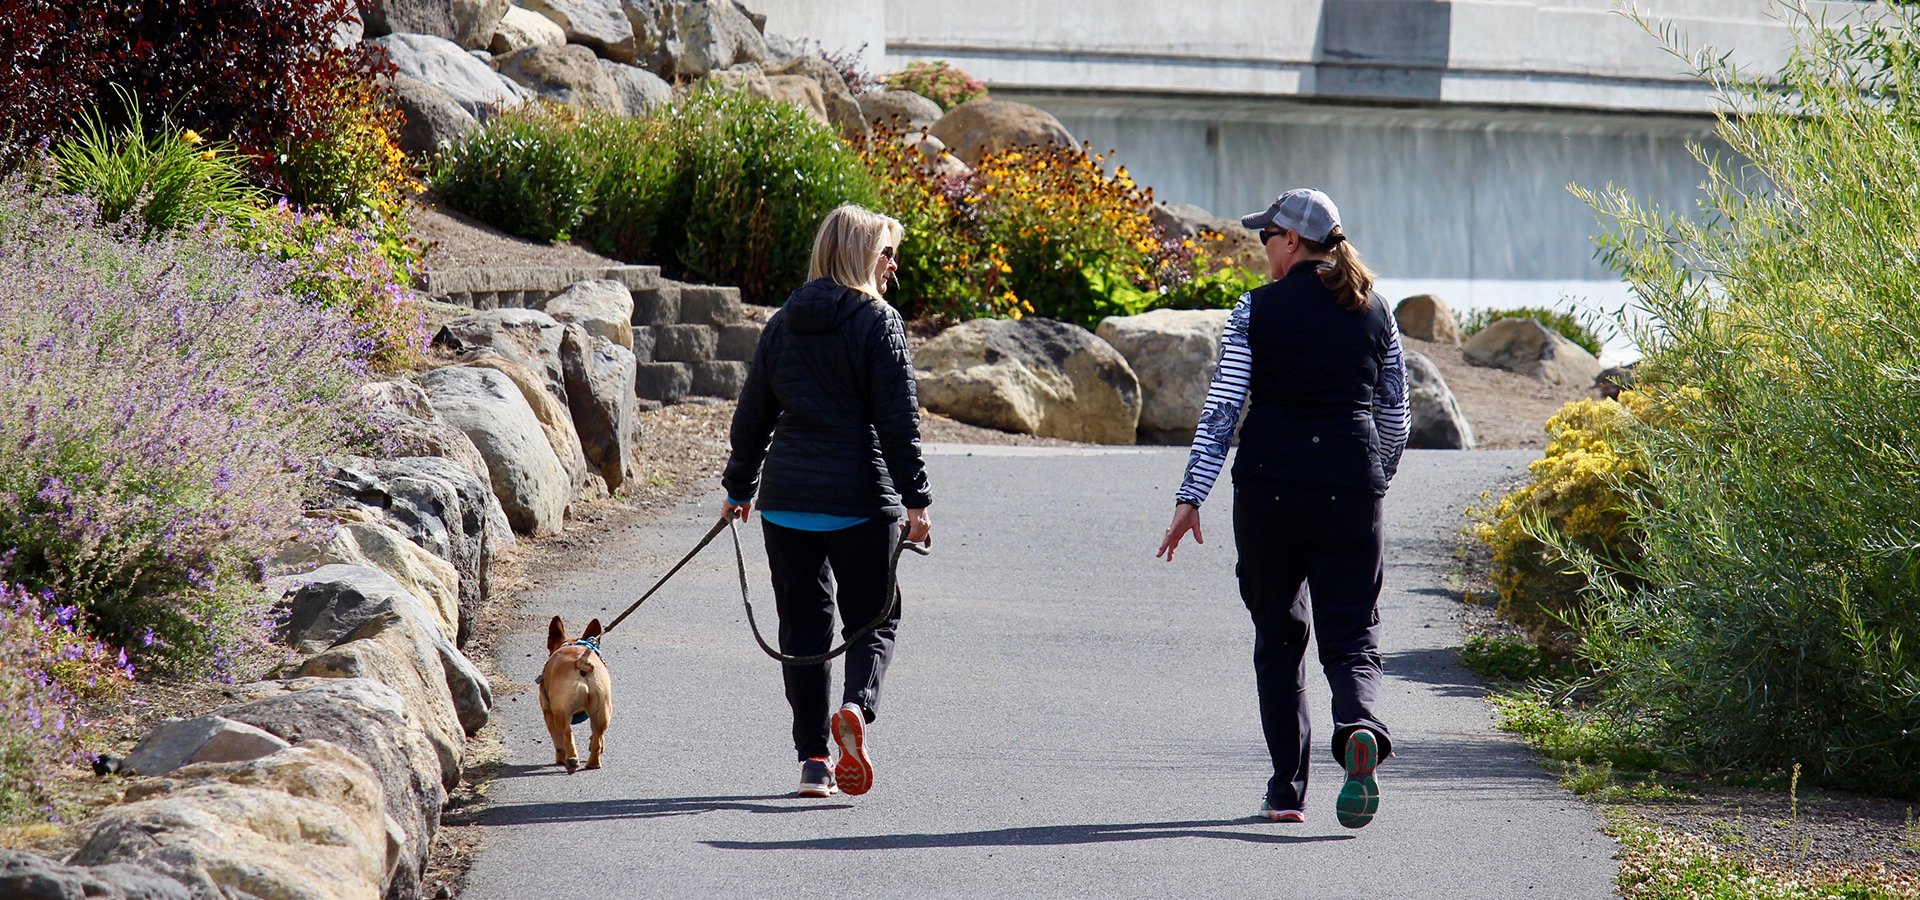 Two people and a dog walking on the Deschutes River Trail near the Old Mill in Bend.